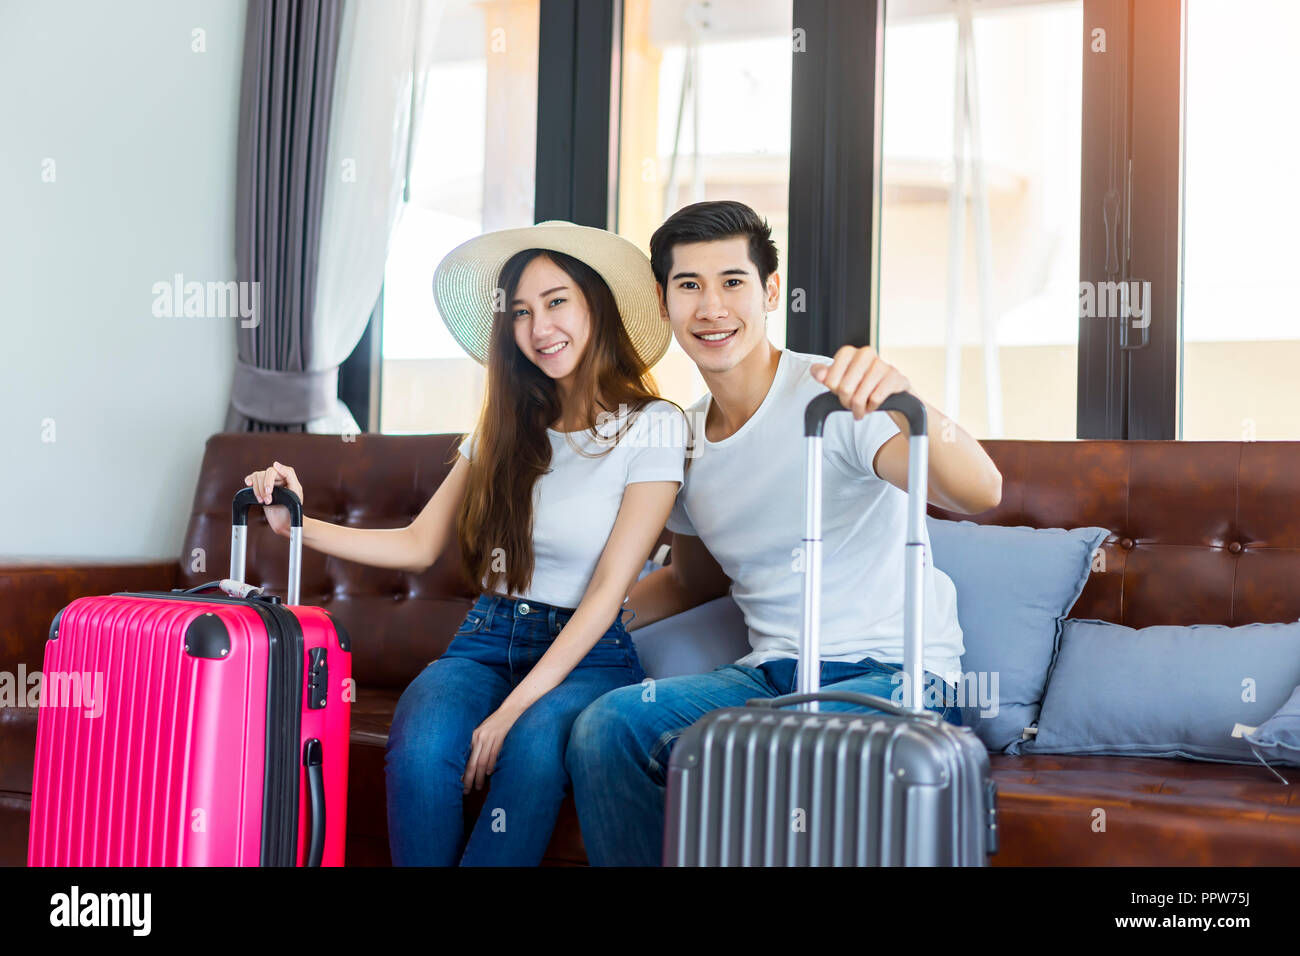 Happiness Asian couple traveler packing suitcases preparing for travel vacation together.Happy enjoy to smiling at home in the living room. Stock Photo